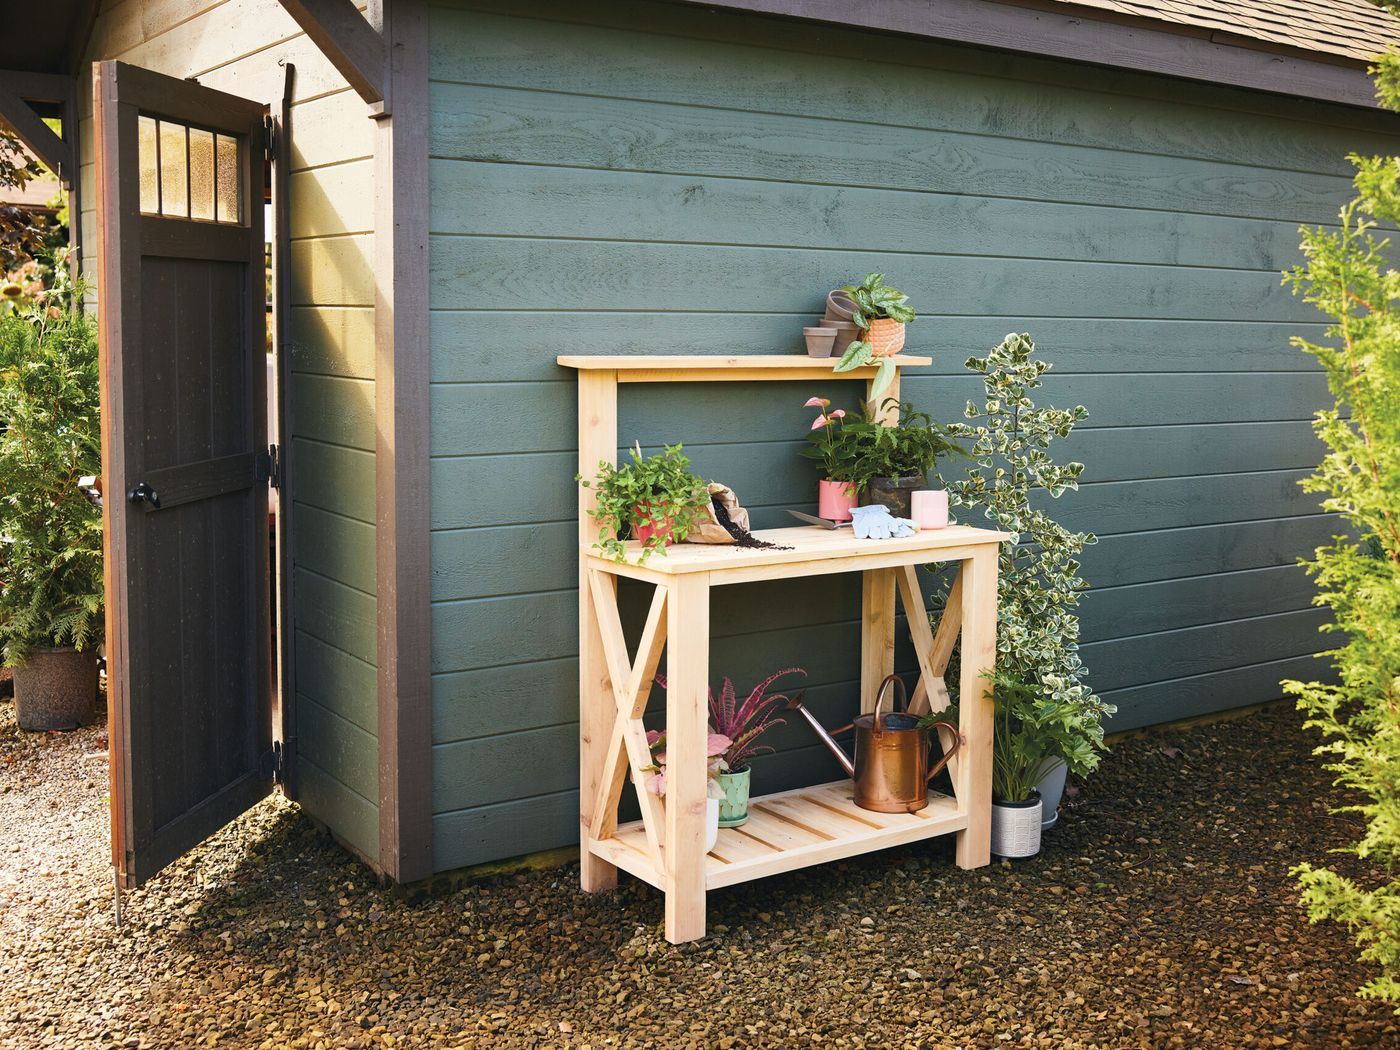 A finished potting bench next to a shed.